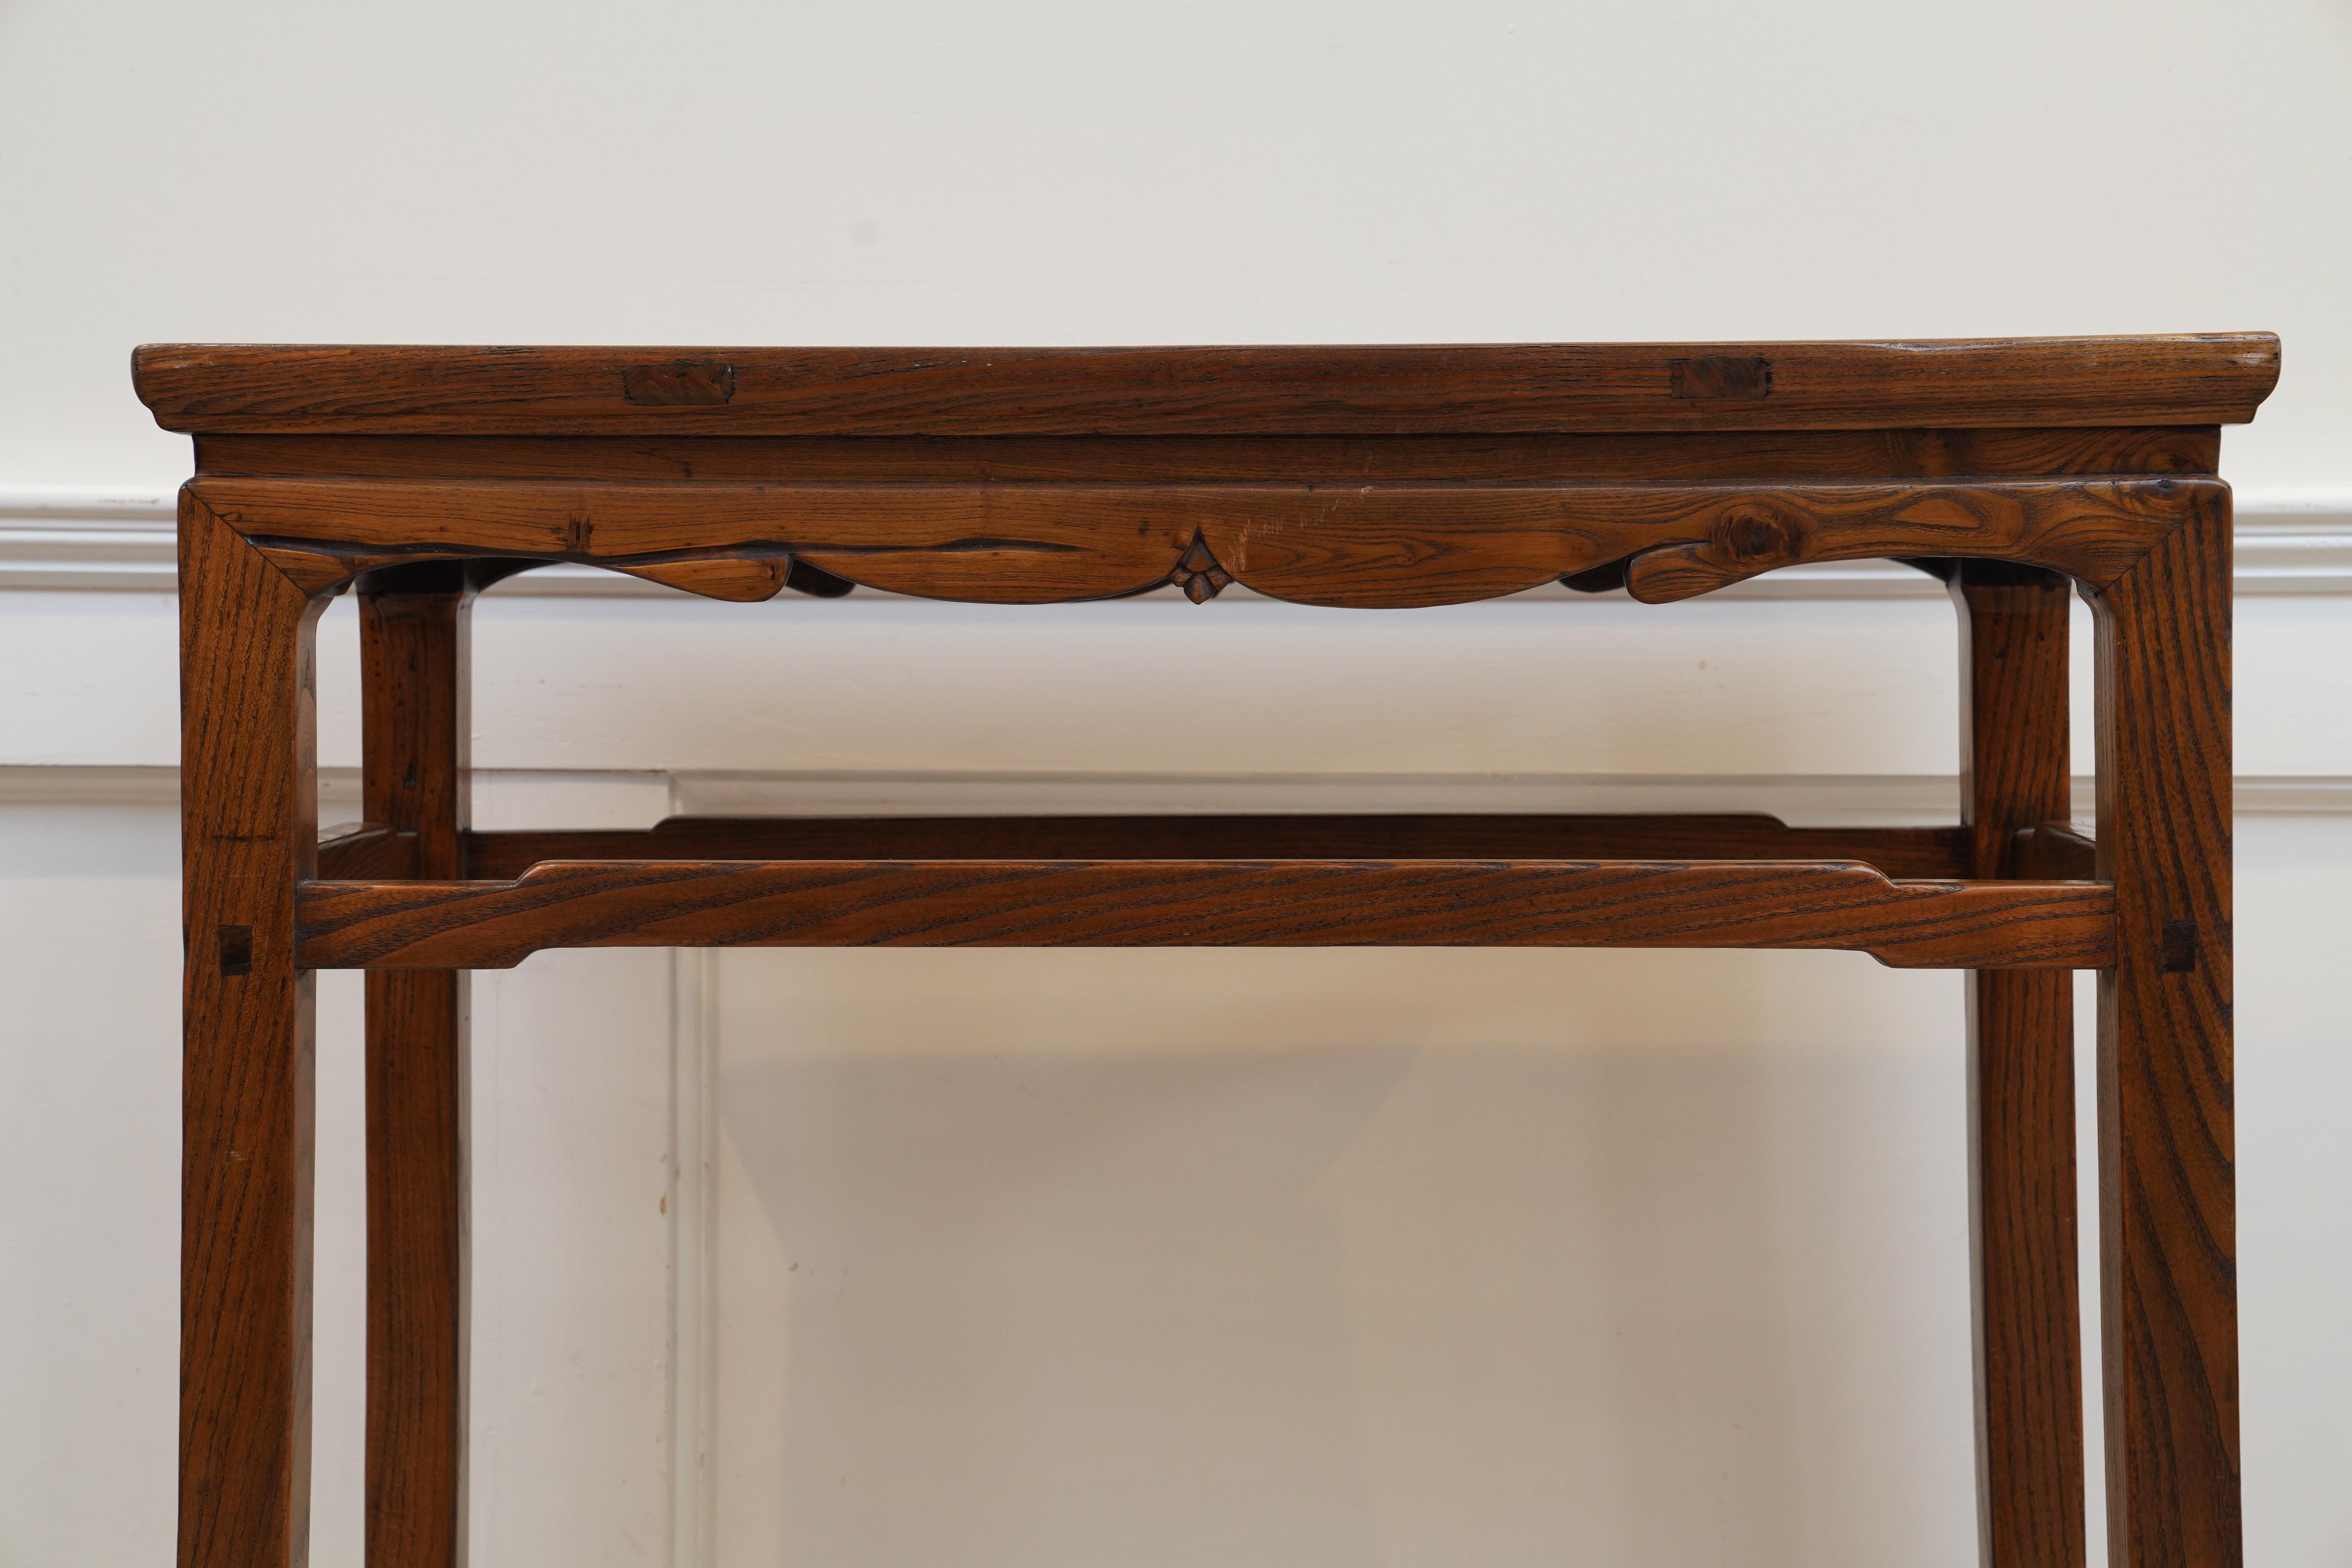 A simple and elegant Chinese table in purple elm with mortise and tenon construction and lovely patina. Originally used a hall or altar table. Great as a console table for an entryway, a server or behind a sofa. C. 1870.